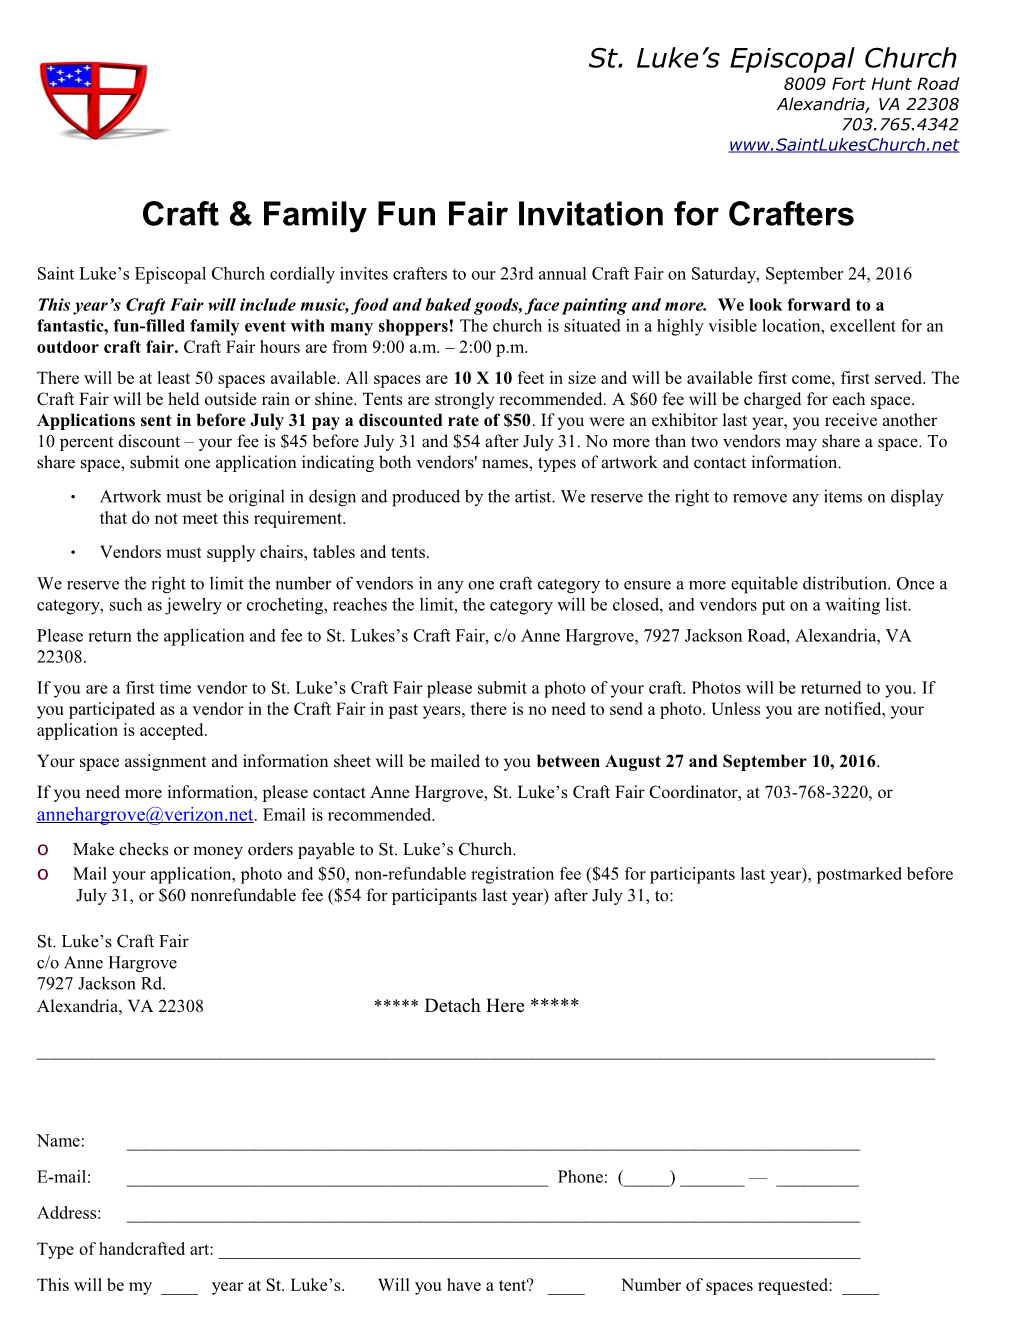 Craft & Family Fun Fair Invitation for Crafters